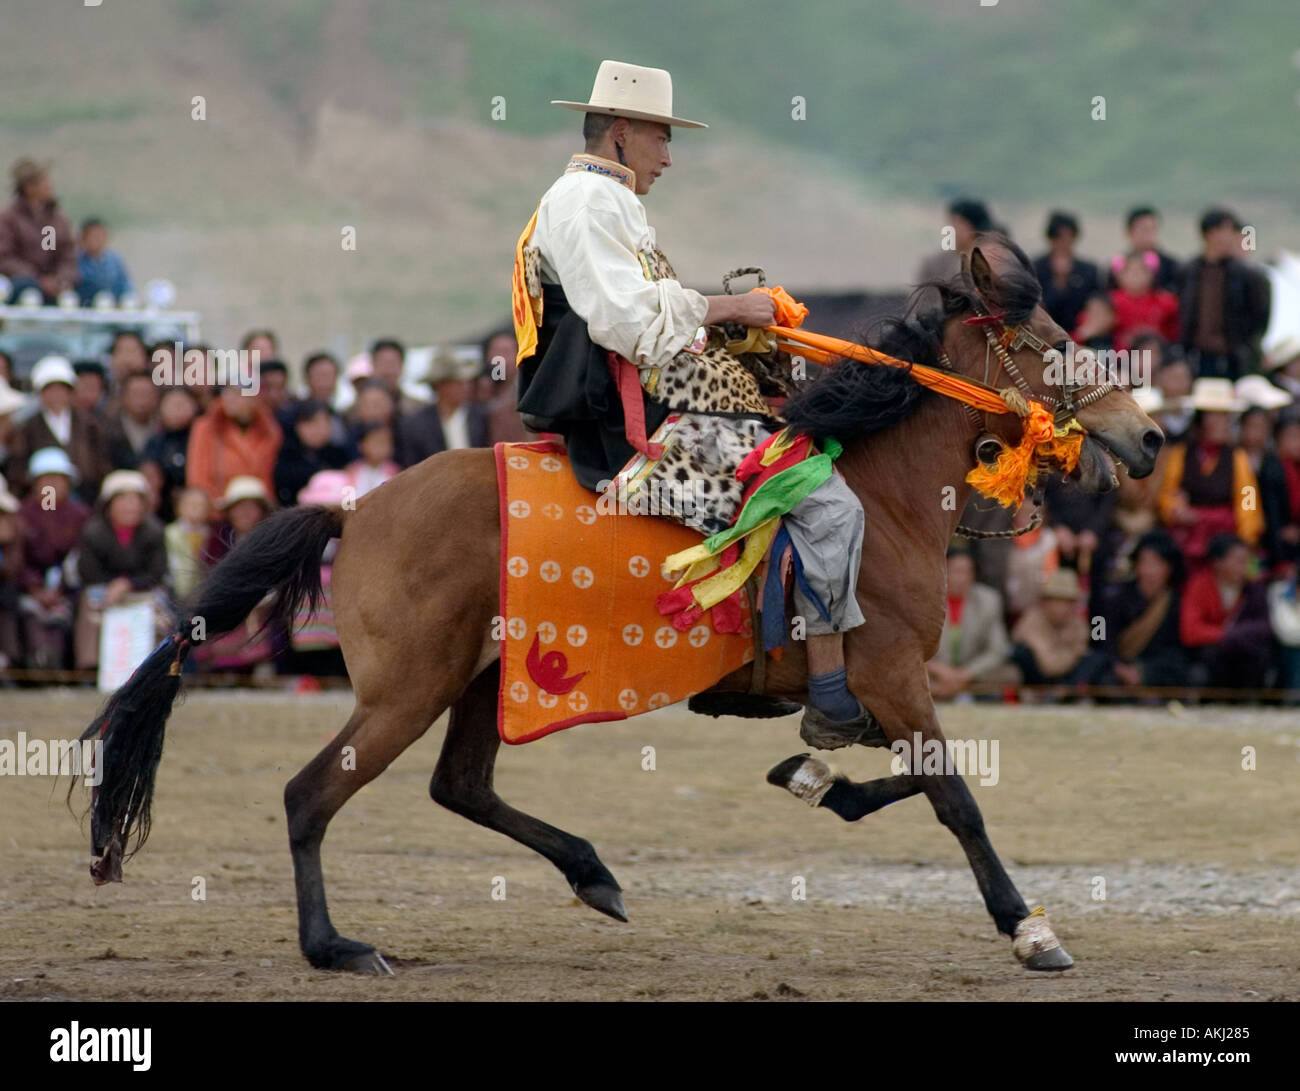 A Khampa participates in the dressage competition at the Litang Horse Festival in Kham Sichuan Province China Tibet  Stock Photo